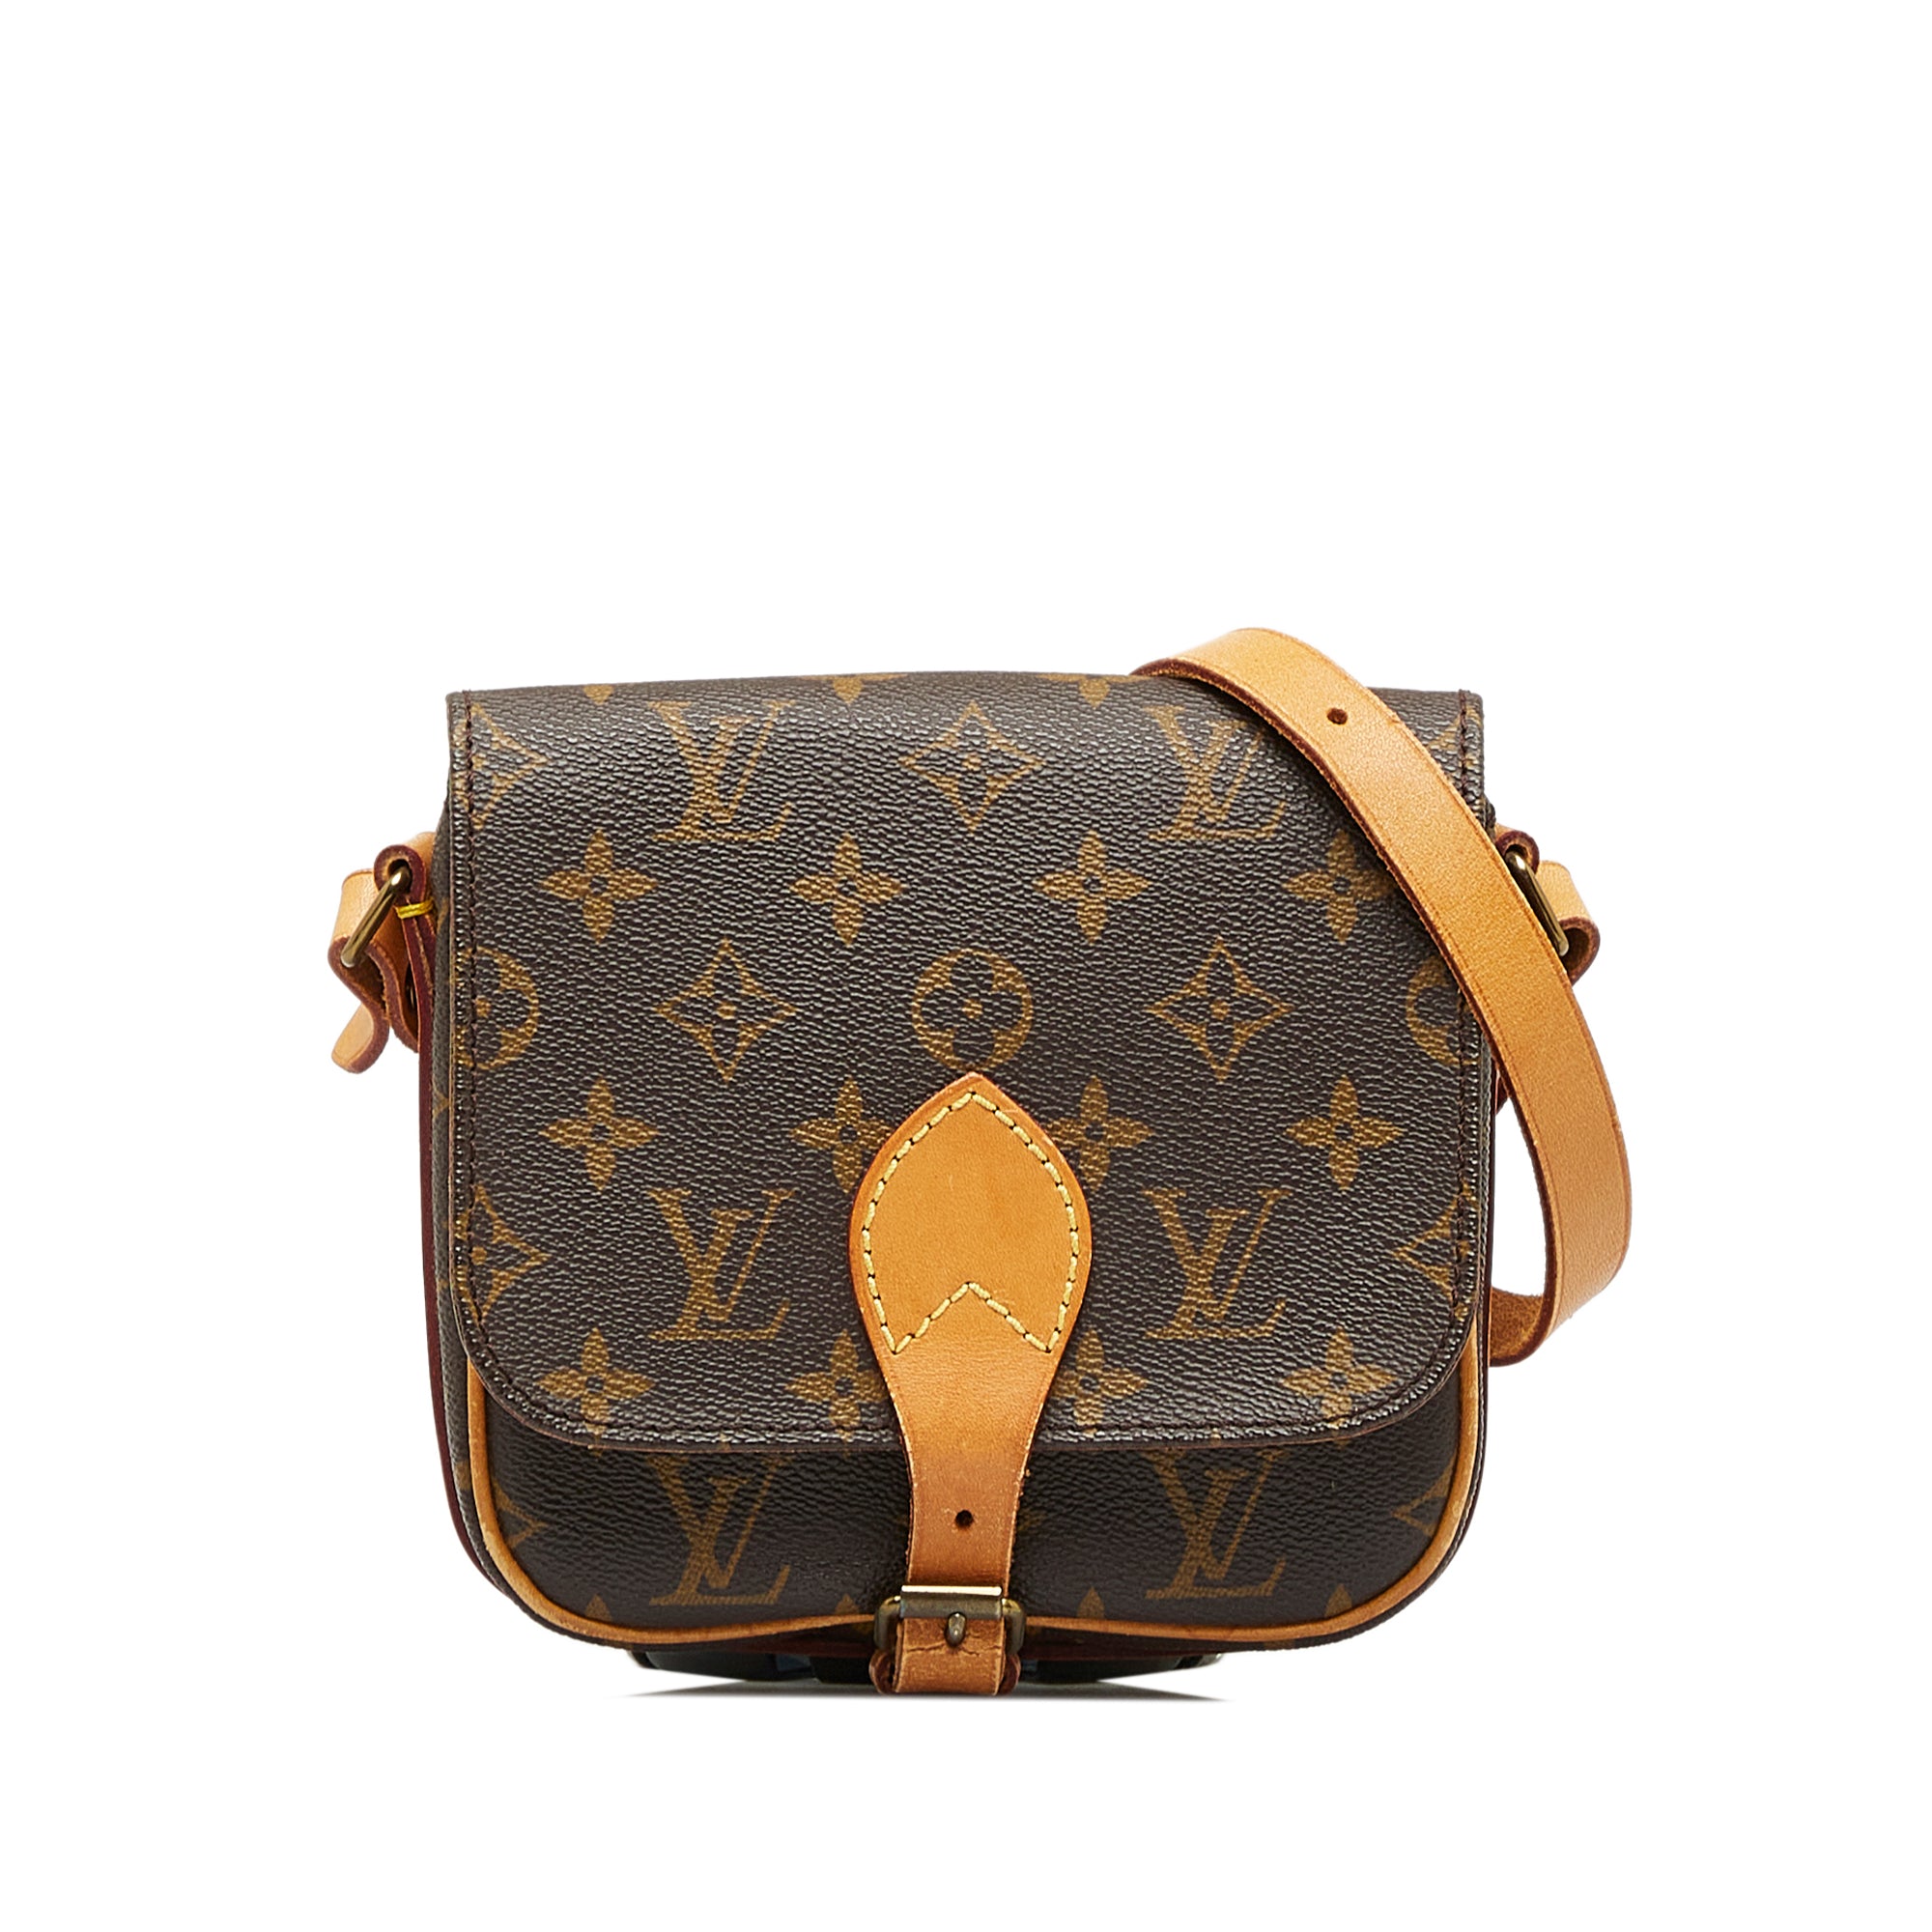 Shop for Louis Vuitton Monogram Canvas Leather Cartouchiere PM Shoulder Bag  - Shipped from USA